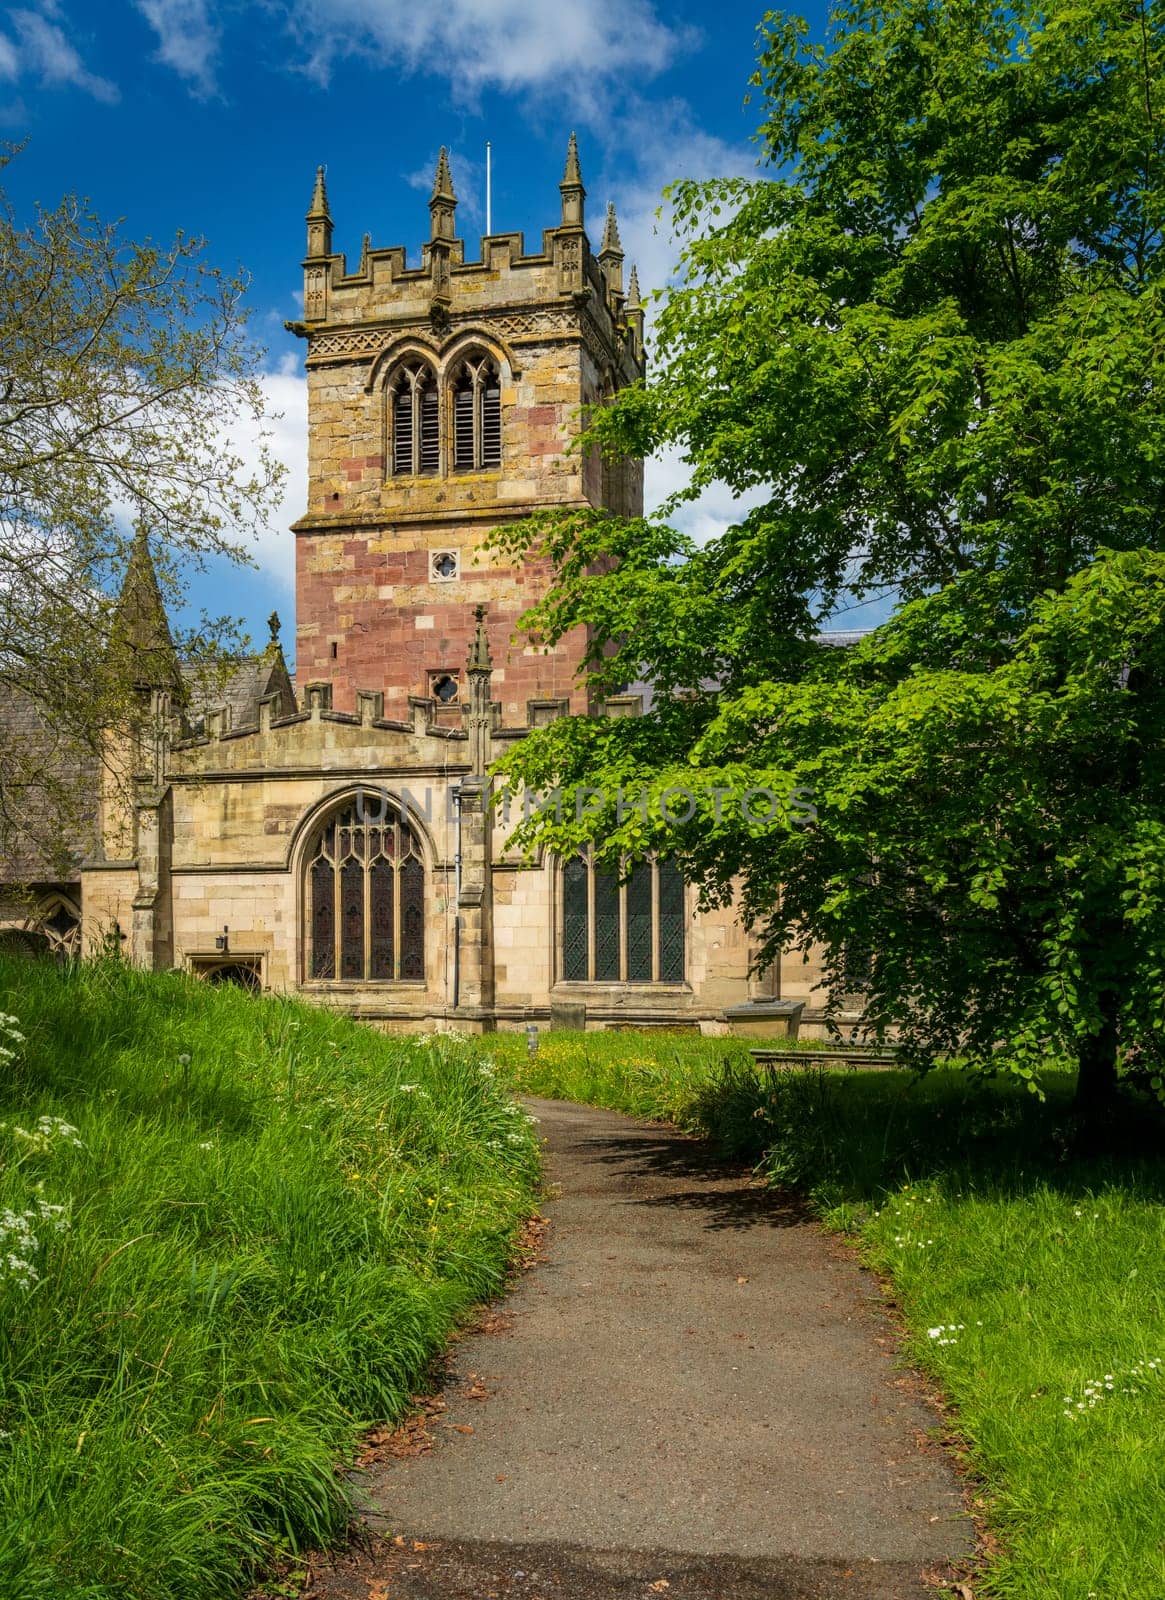 Church tower of parish church of St Mary in Ellesmere Shropshire from churchyard